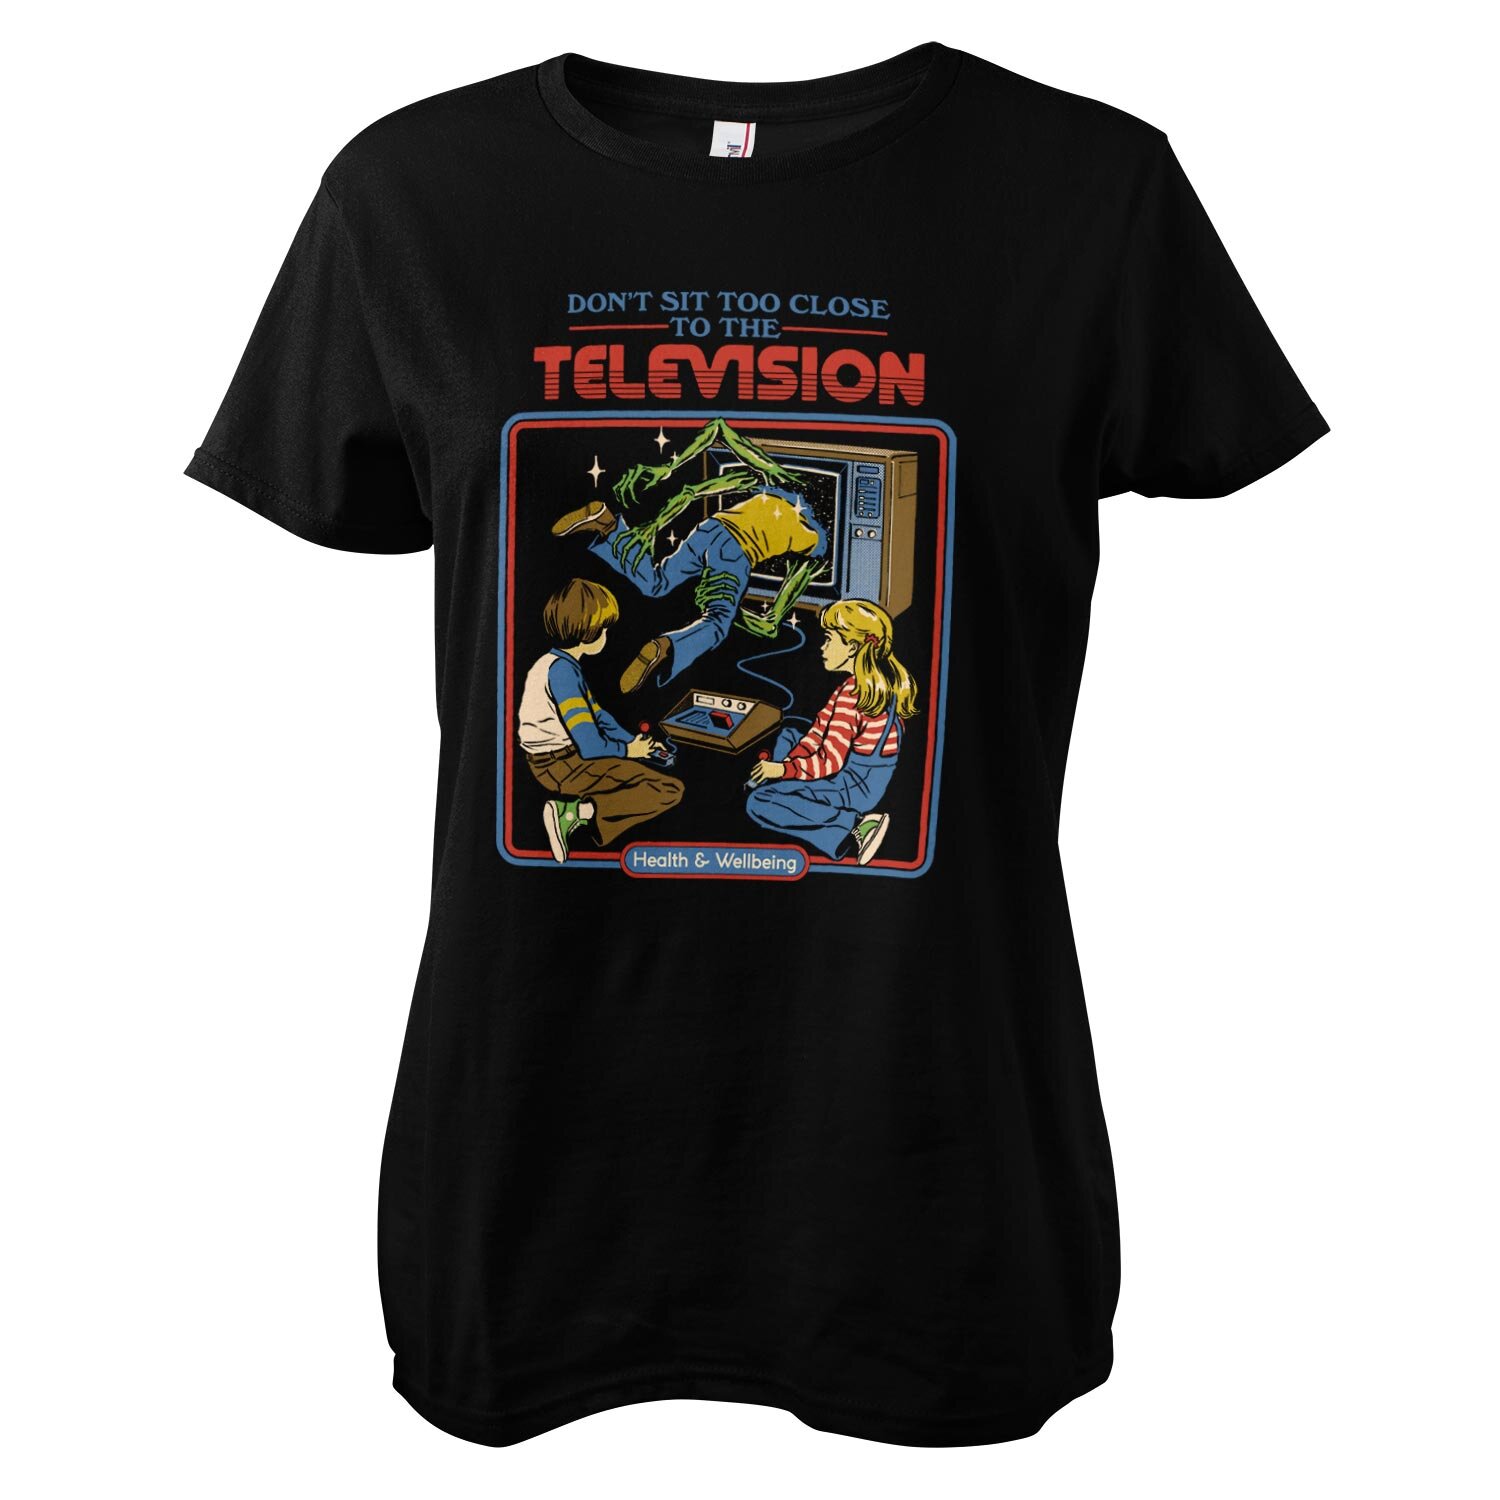 Don't Sit Too Close To The Television Girly Tee